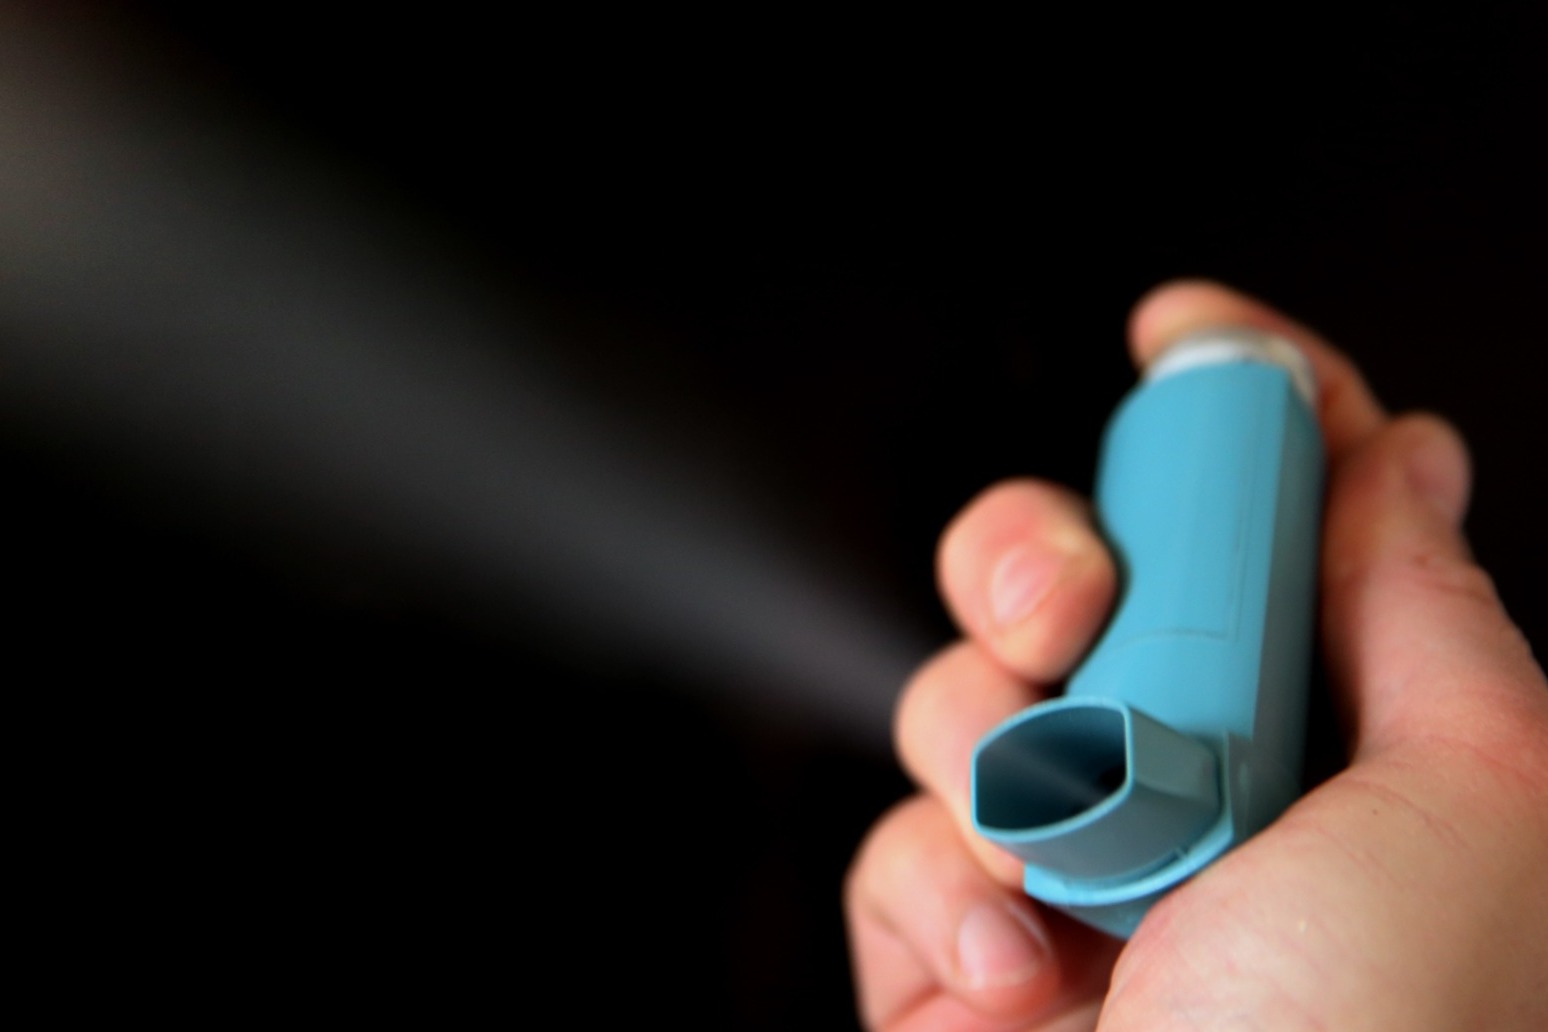 Million asthma patients over reliant on reliever inhalers charity warns